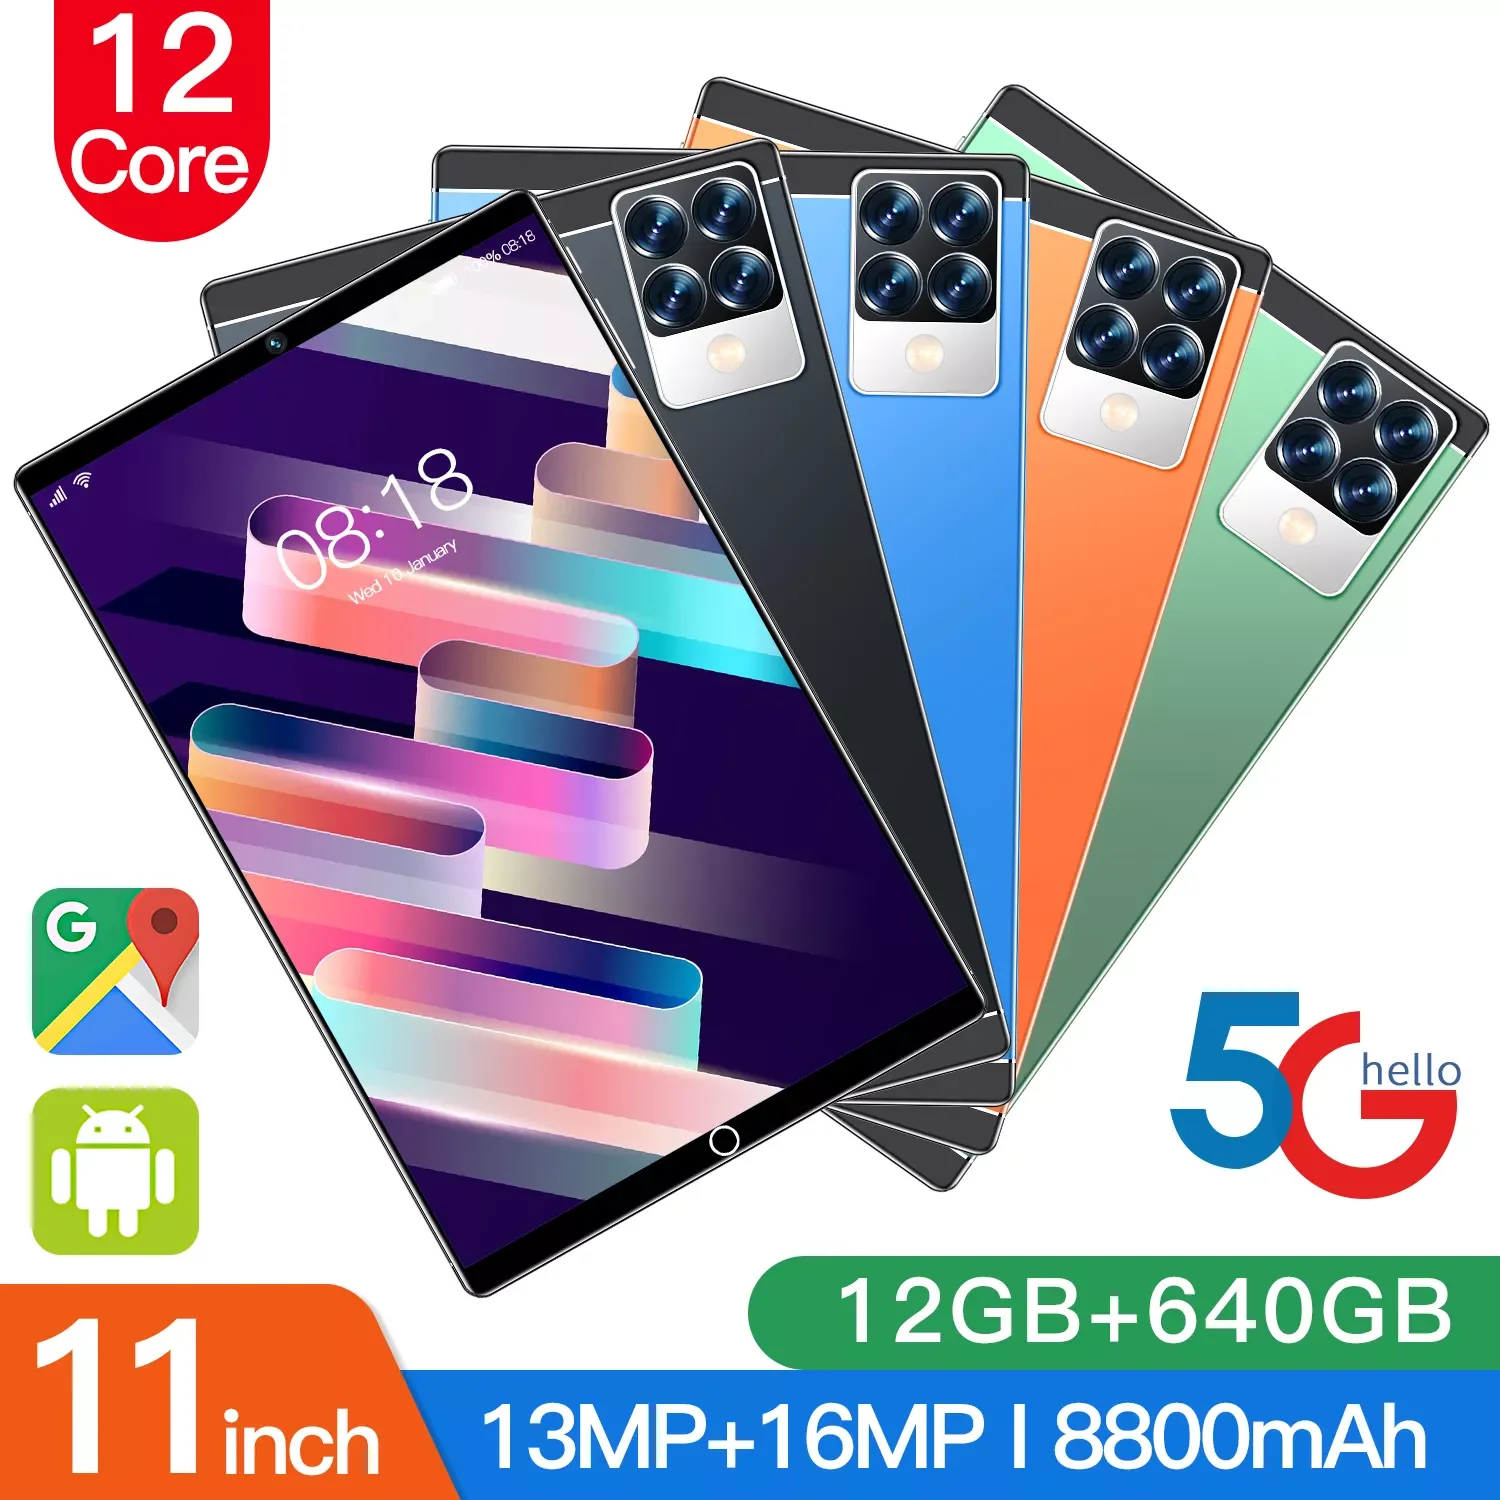 

2022 New 10.1 inch High-end Tablet RAM 12GB ROM 640 GB HD Online Learning Office 5G Wifi Android Children's Tablets